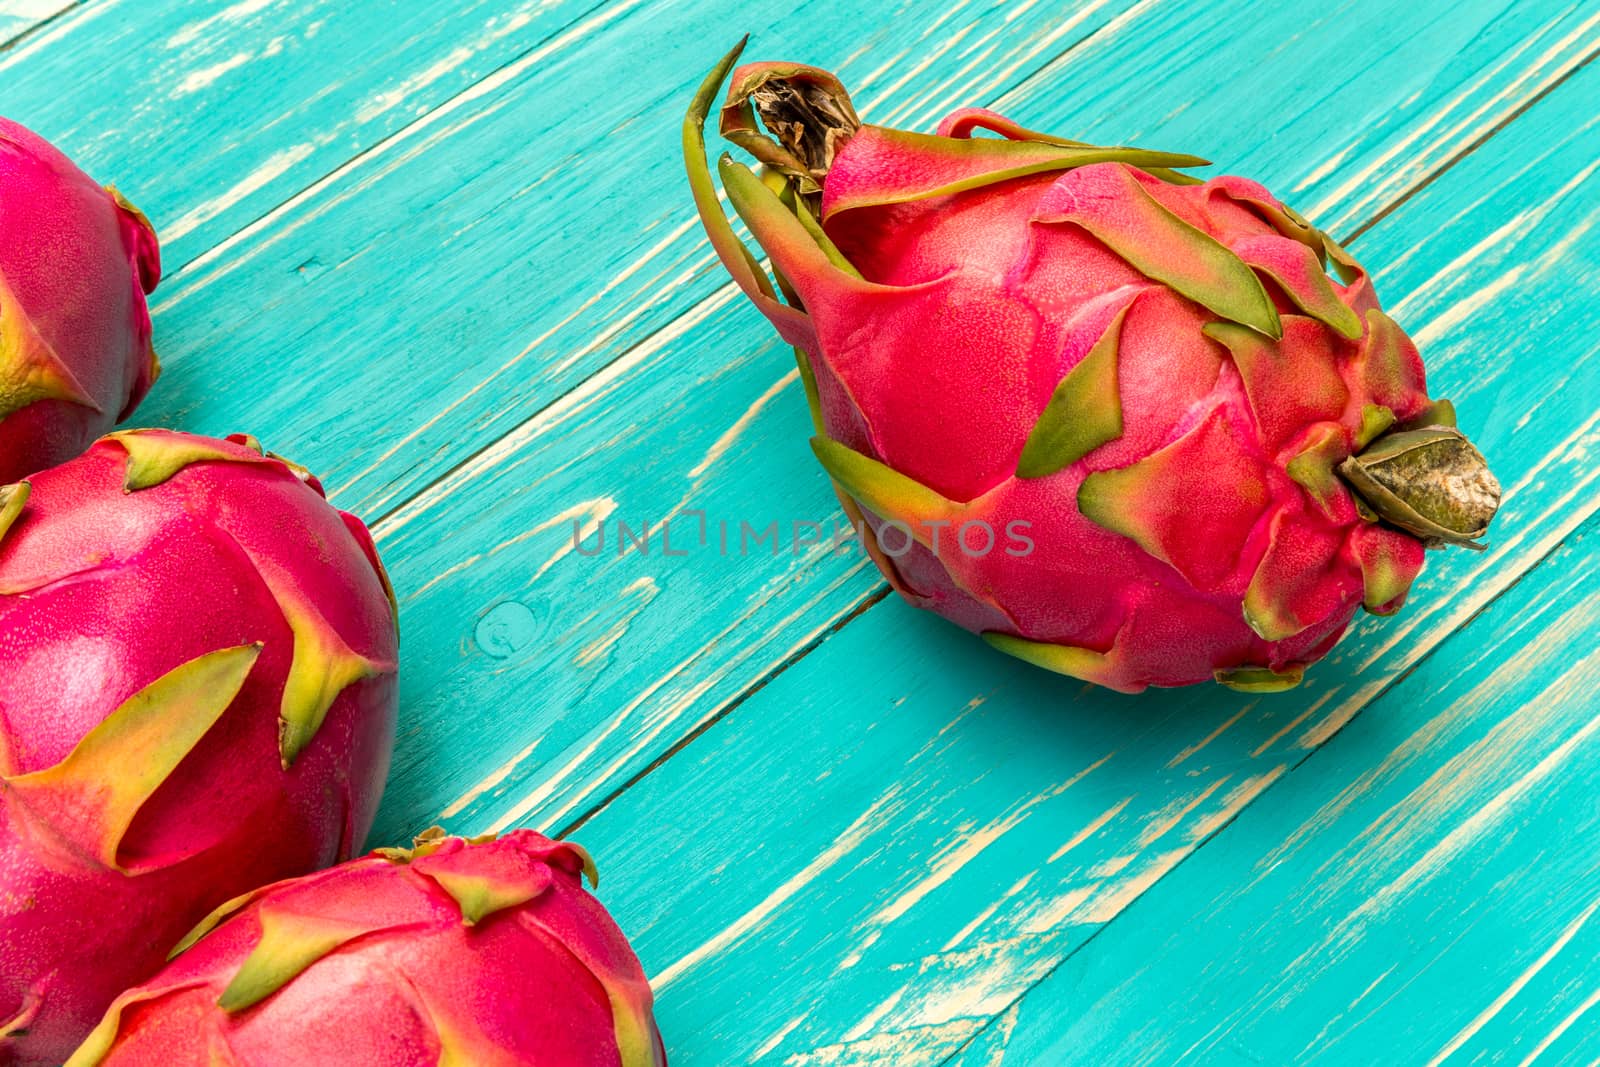 Dragon fruit is exotic tropical fruit from southeast Asia.